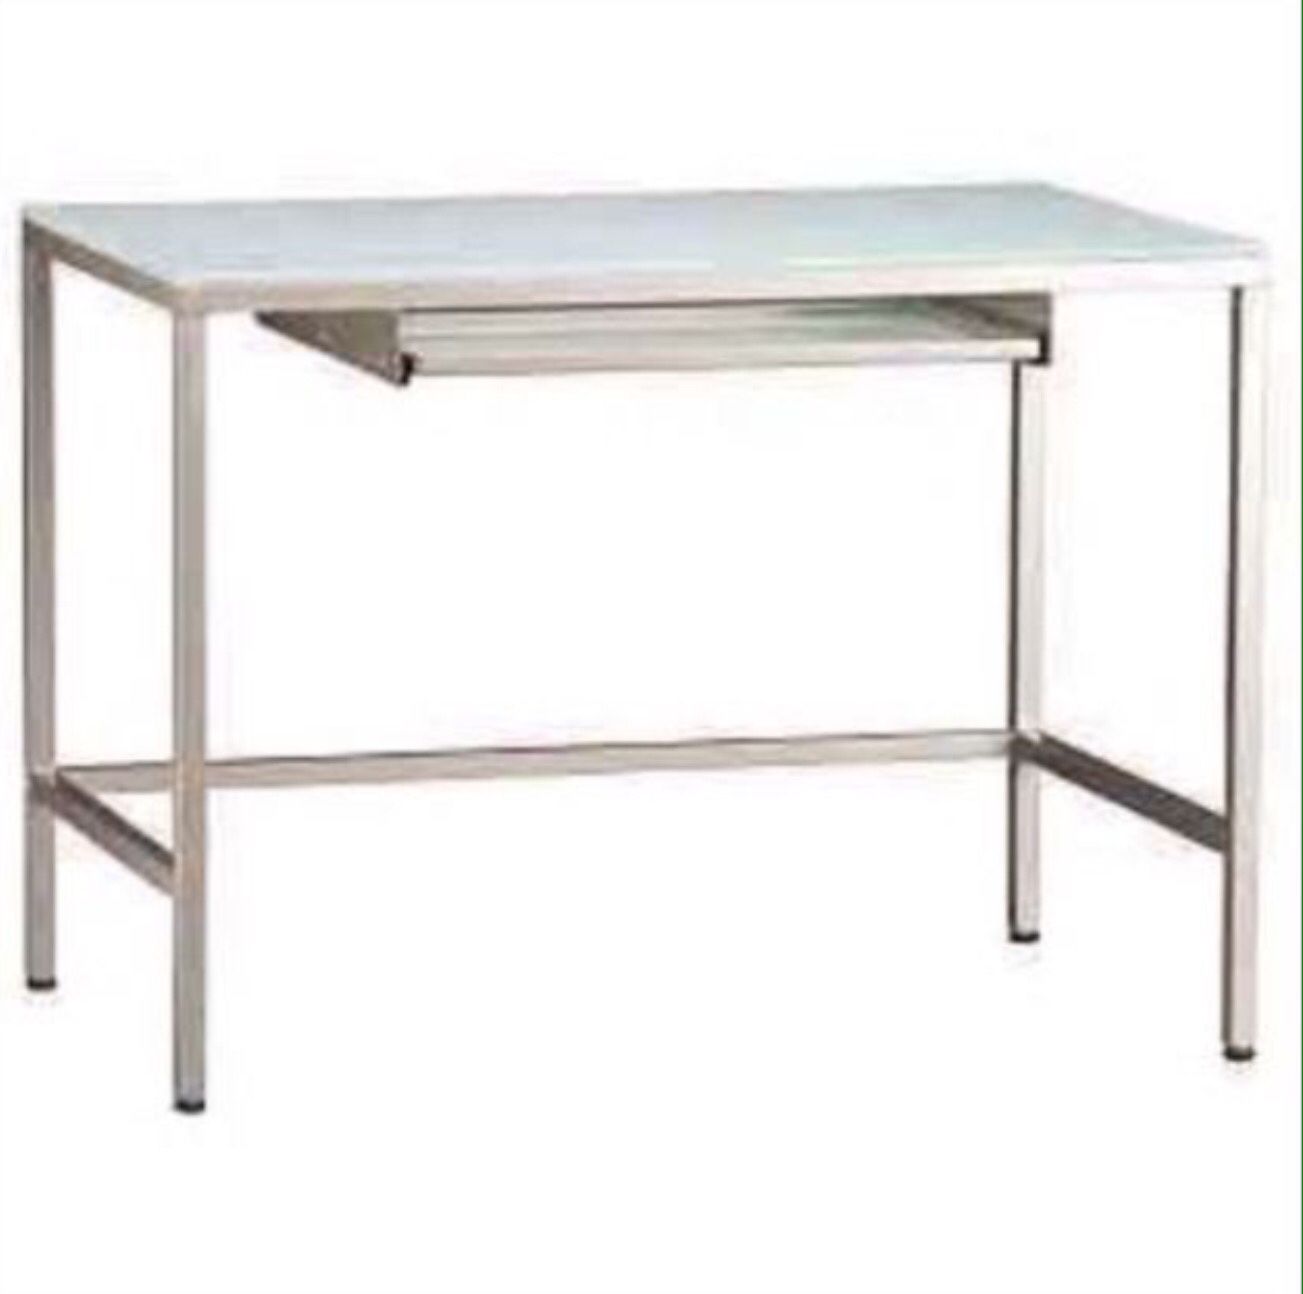 CB2 Trig Frosted Glass Computer Desk, Console Desk and 3 shelf Unit